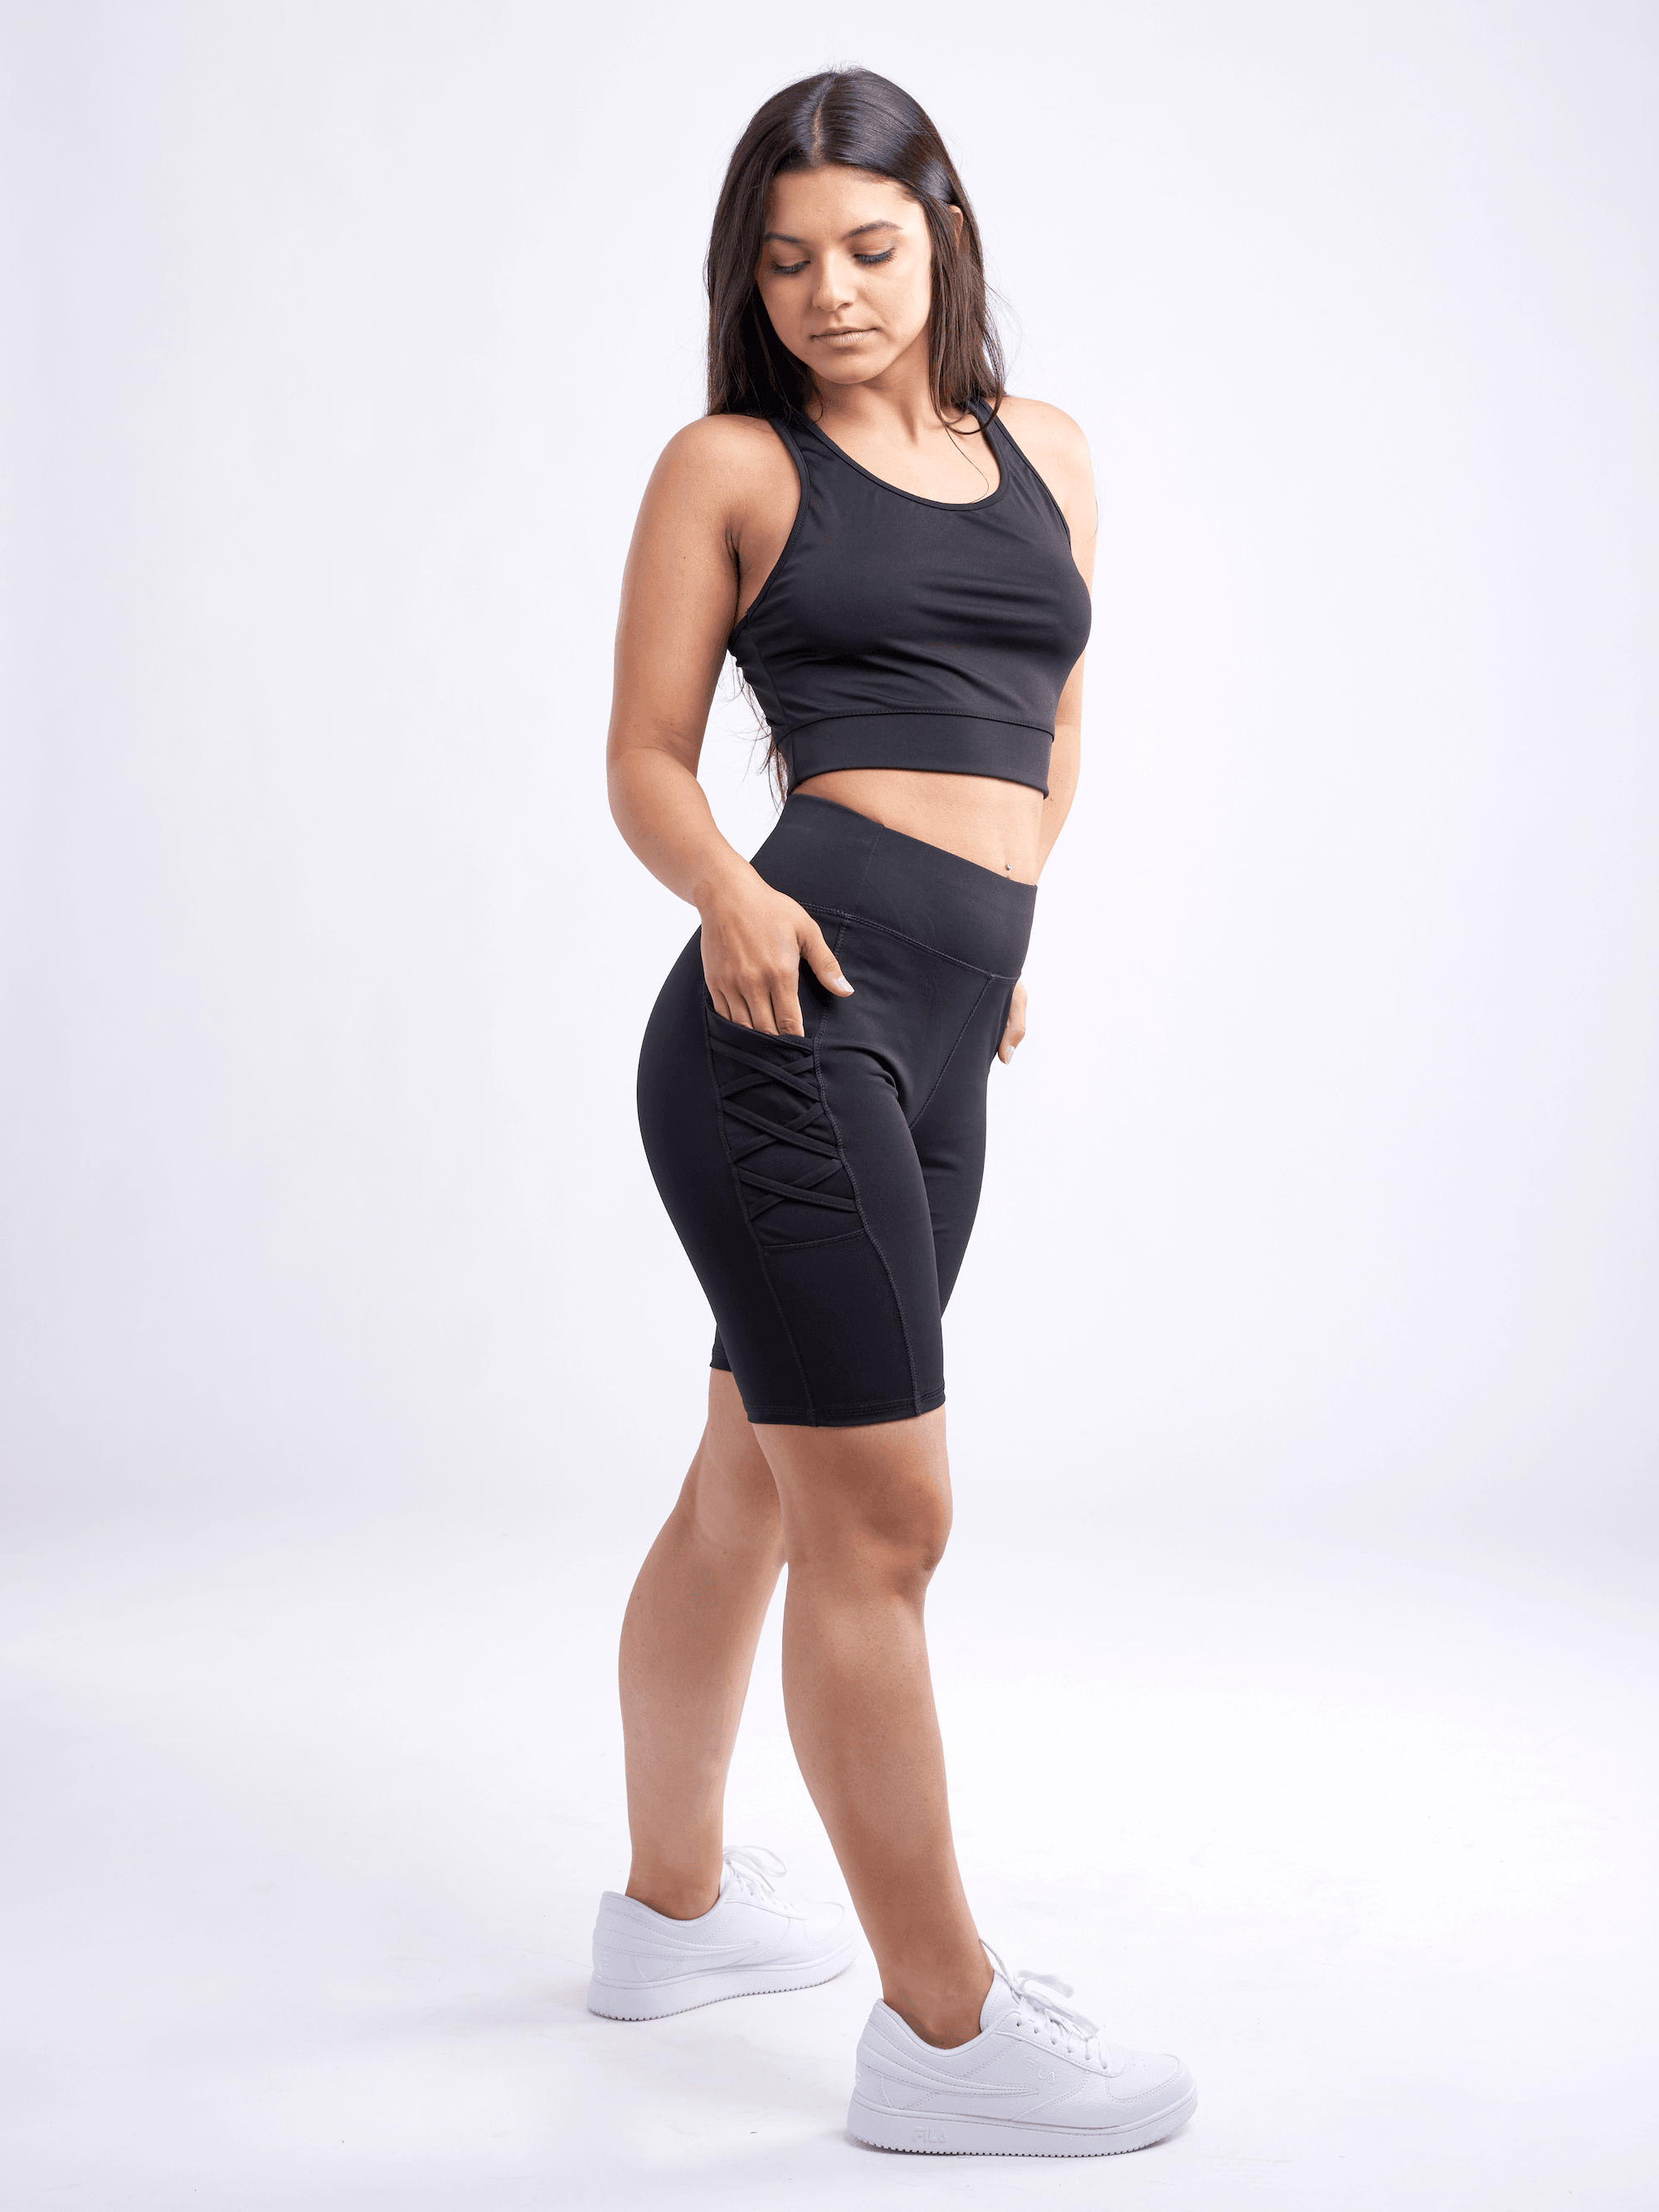 High-Waisted Workout Shorts with Pockets & Criss Cross Design - VirtuousWares:Global